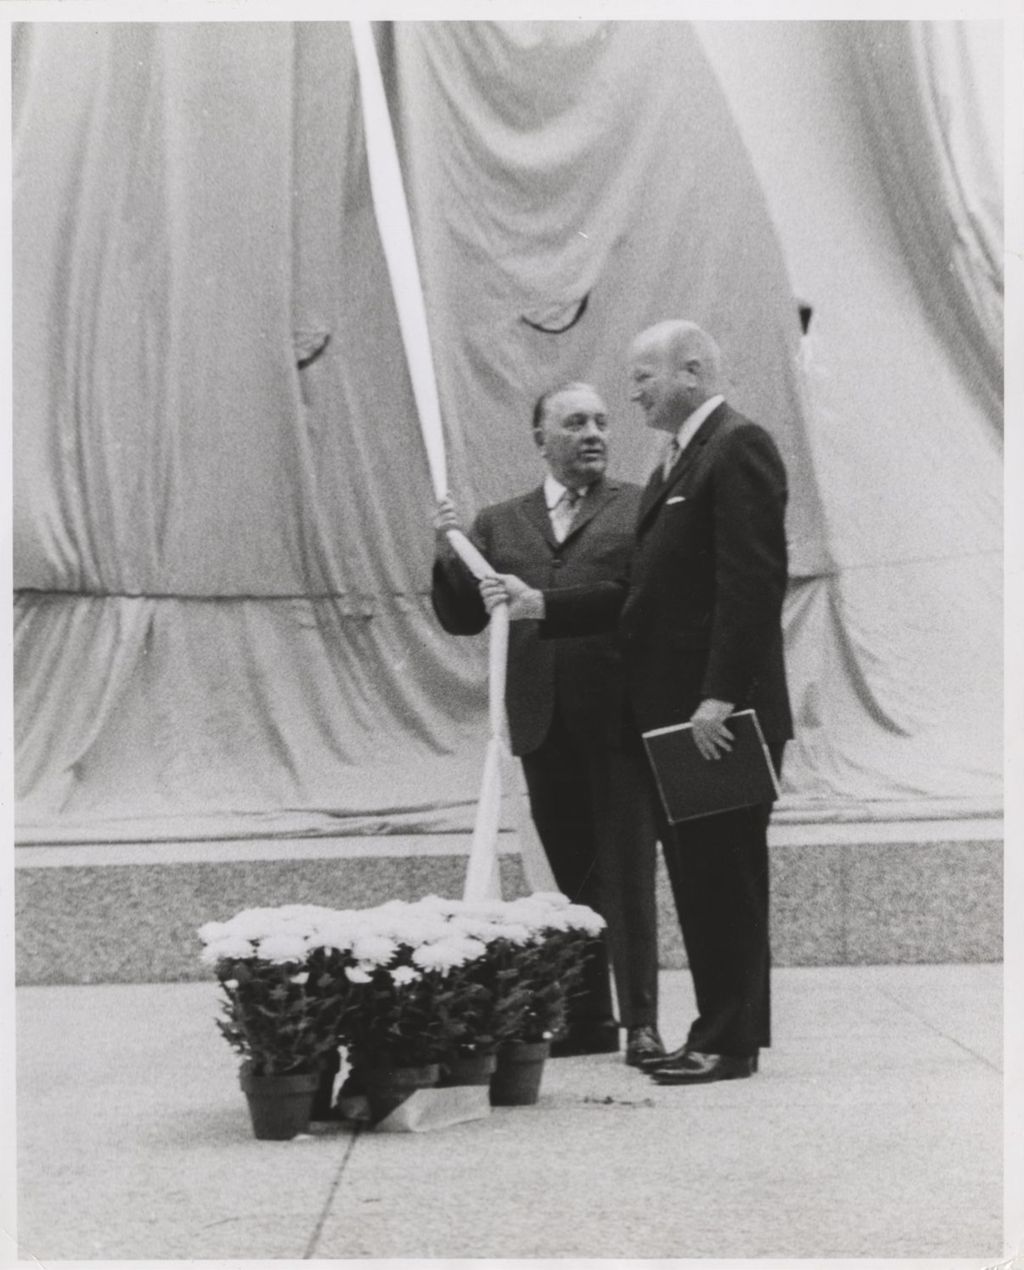 Miniature of Picasso sculpture dedication ceremony, Richard J. Daley and William E. Hartmann about to unveil the sculpture